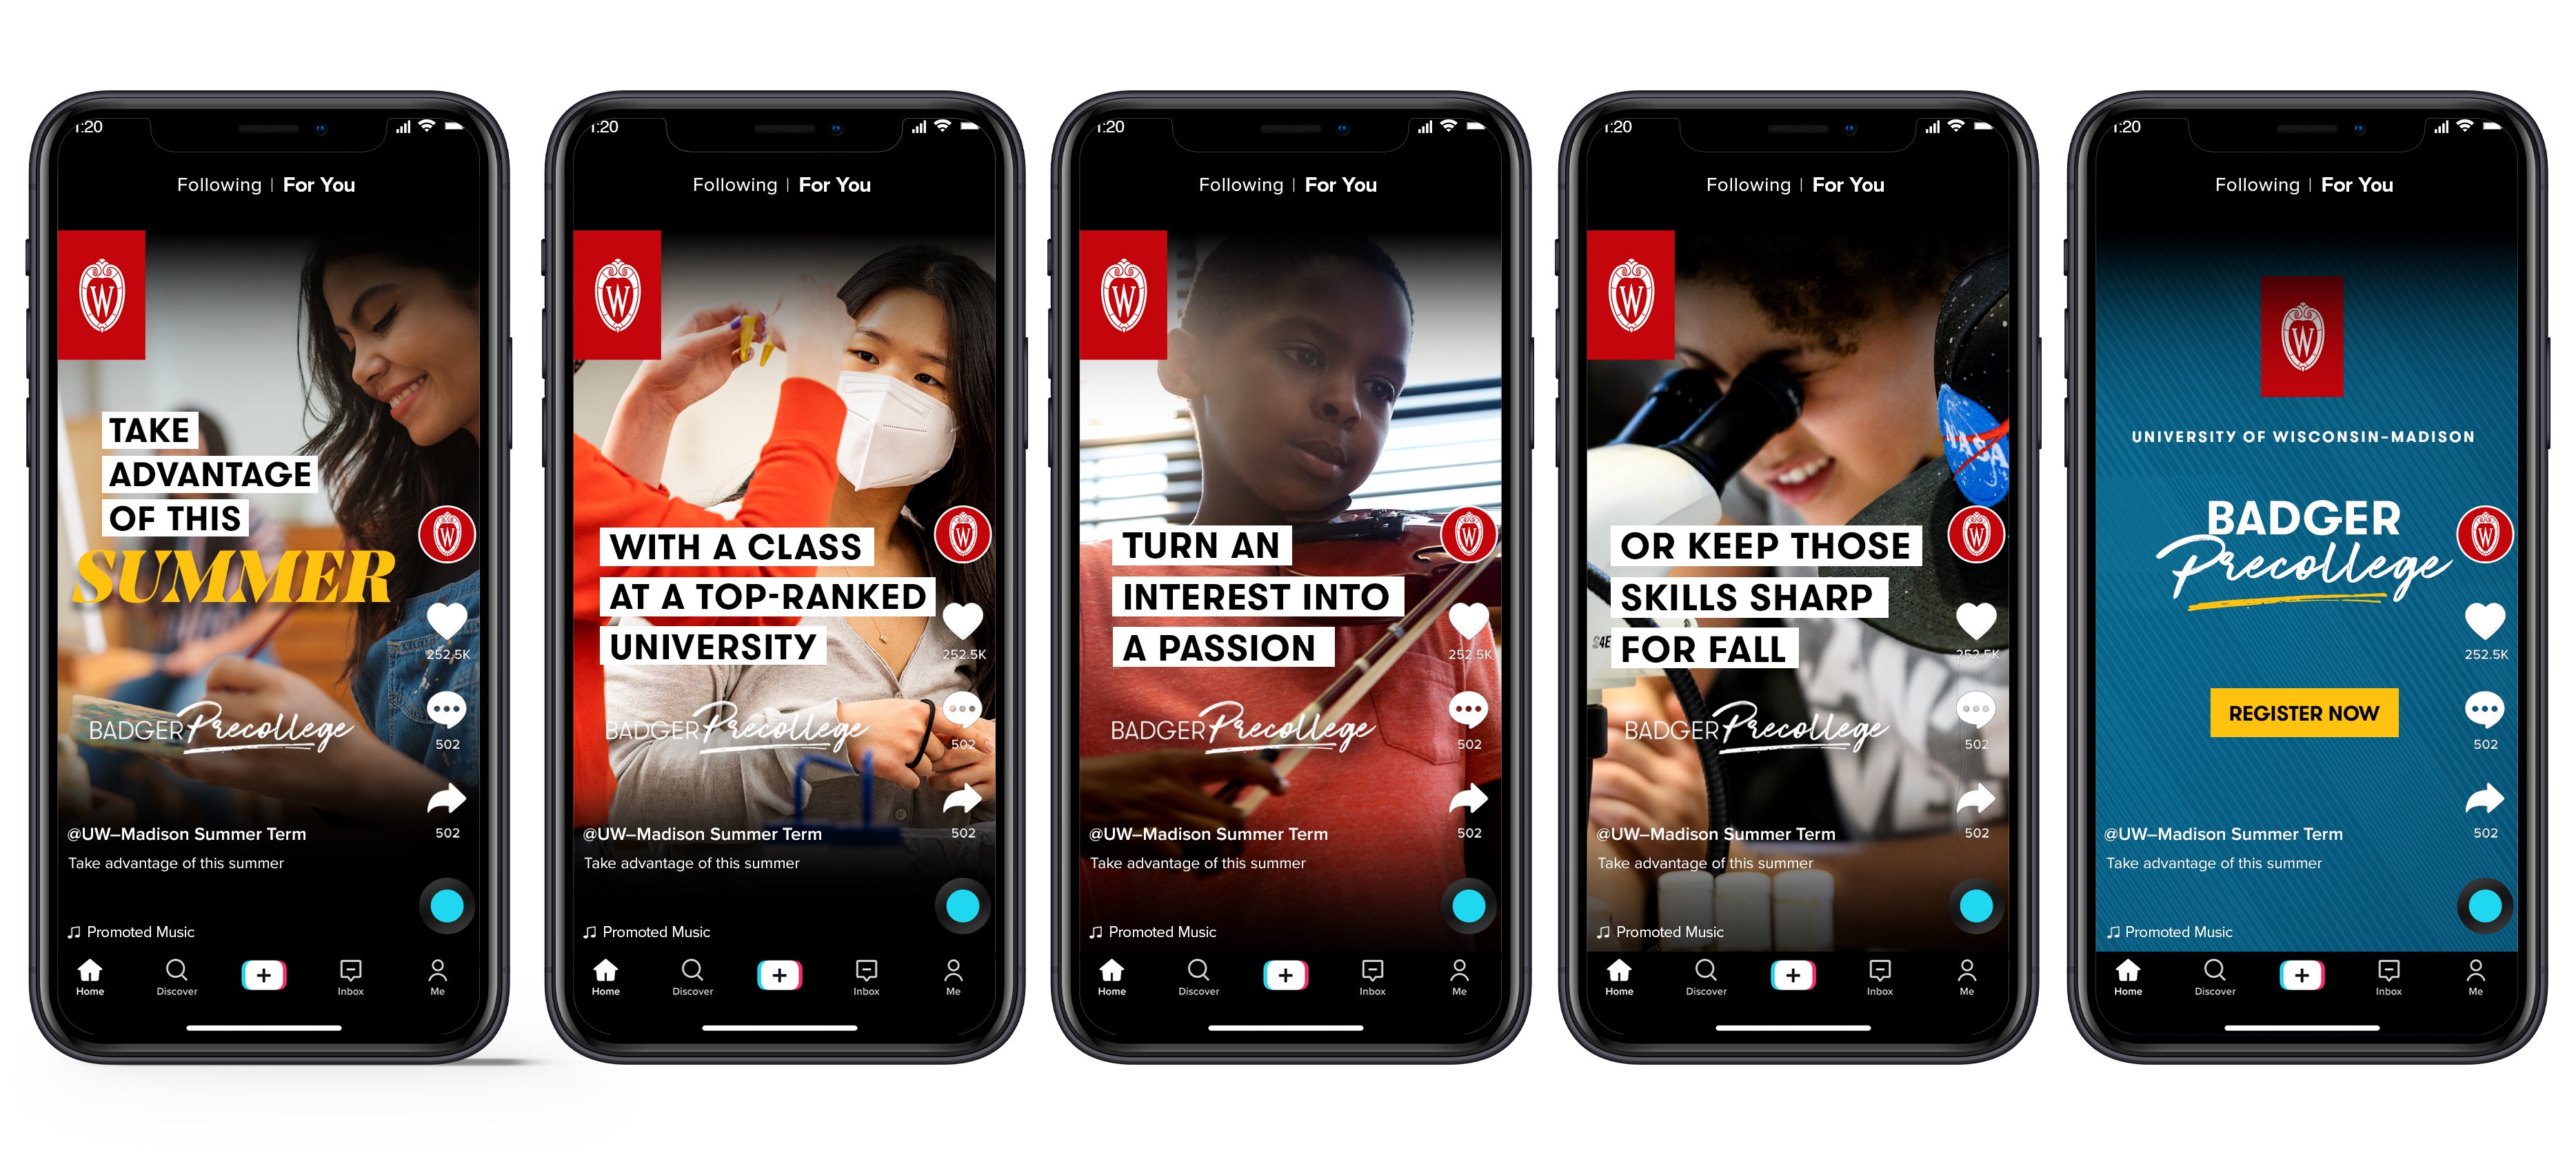 University of Wisconsin–Madison Summer Term Badger Precollege TikTok ad describing program benefits and allowing users to register